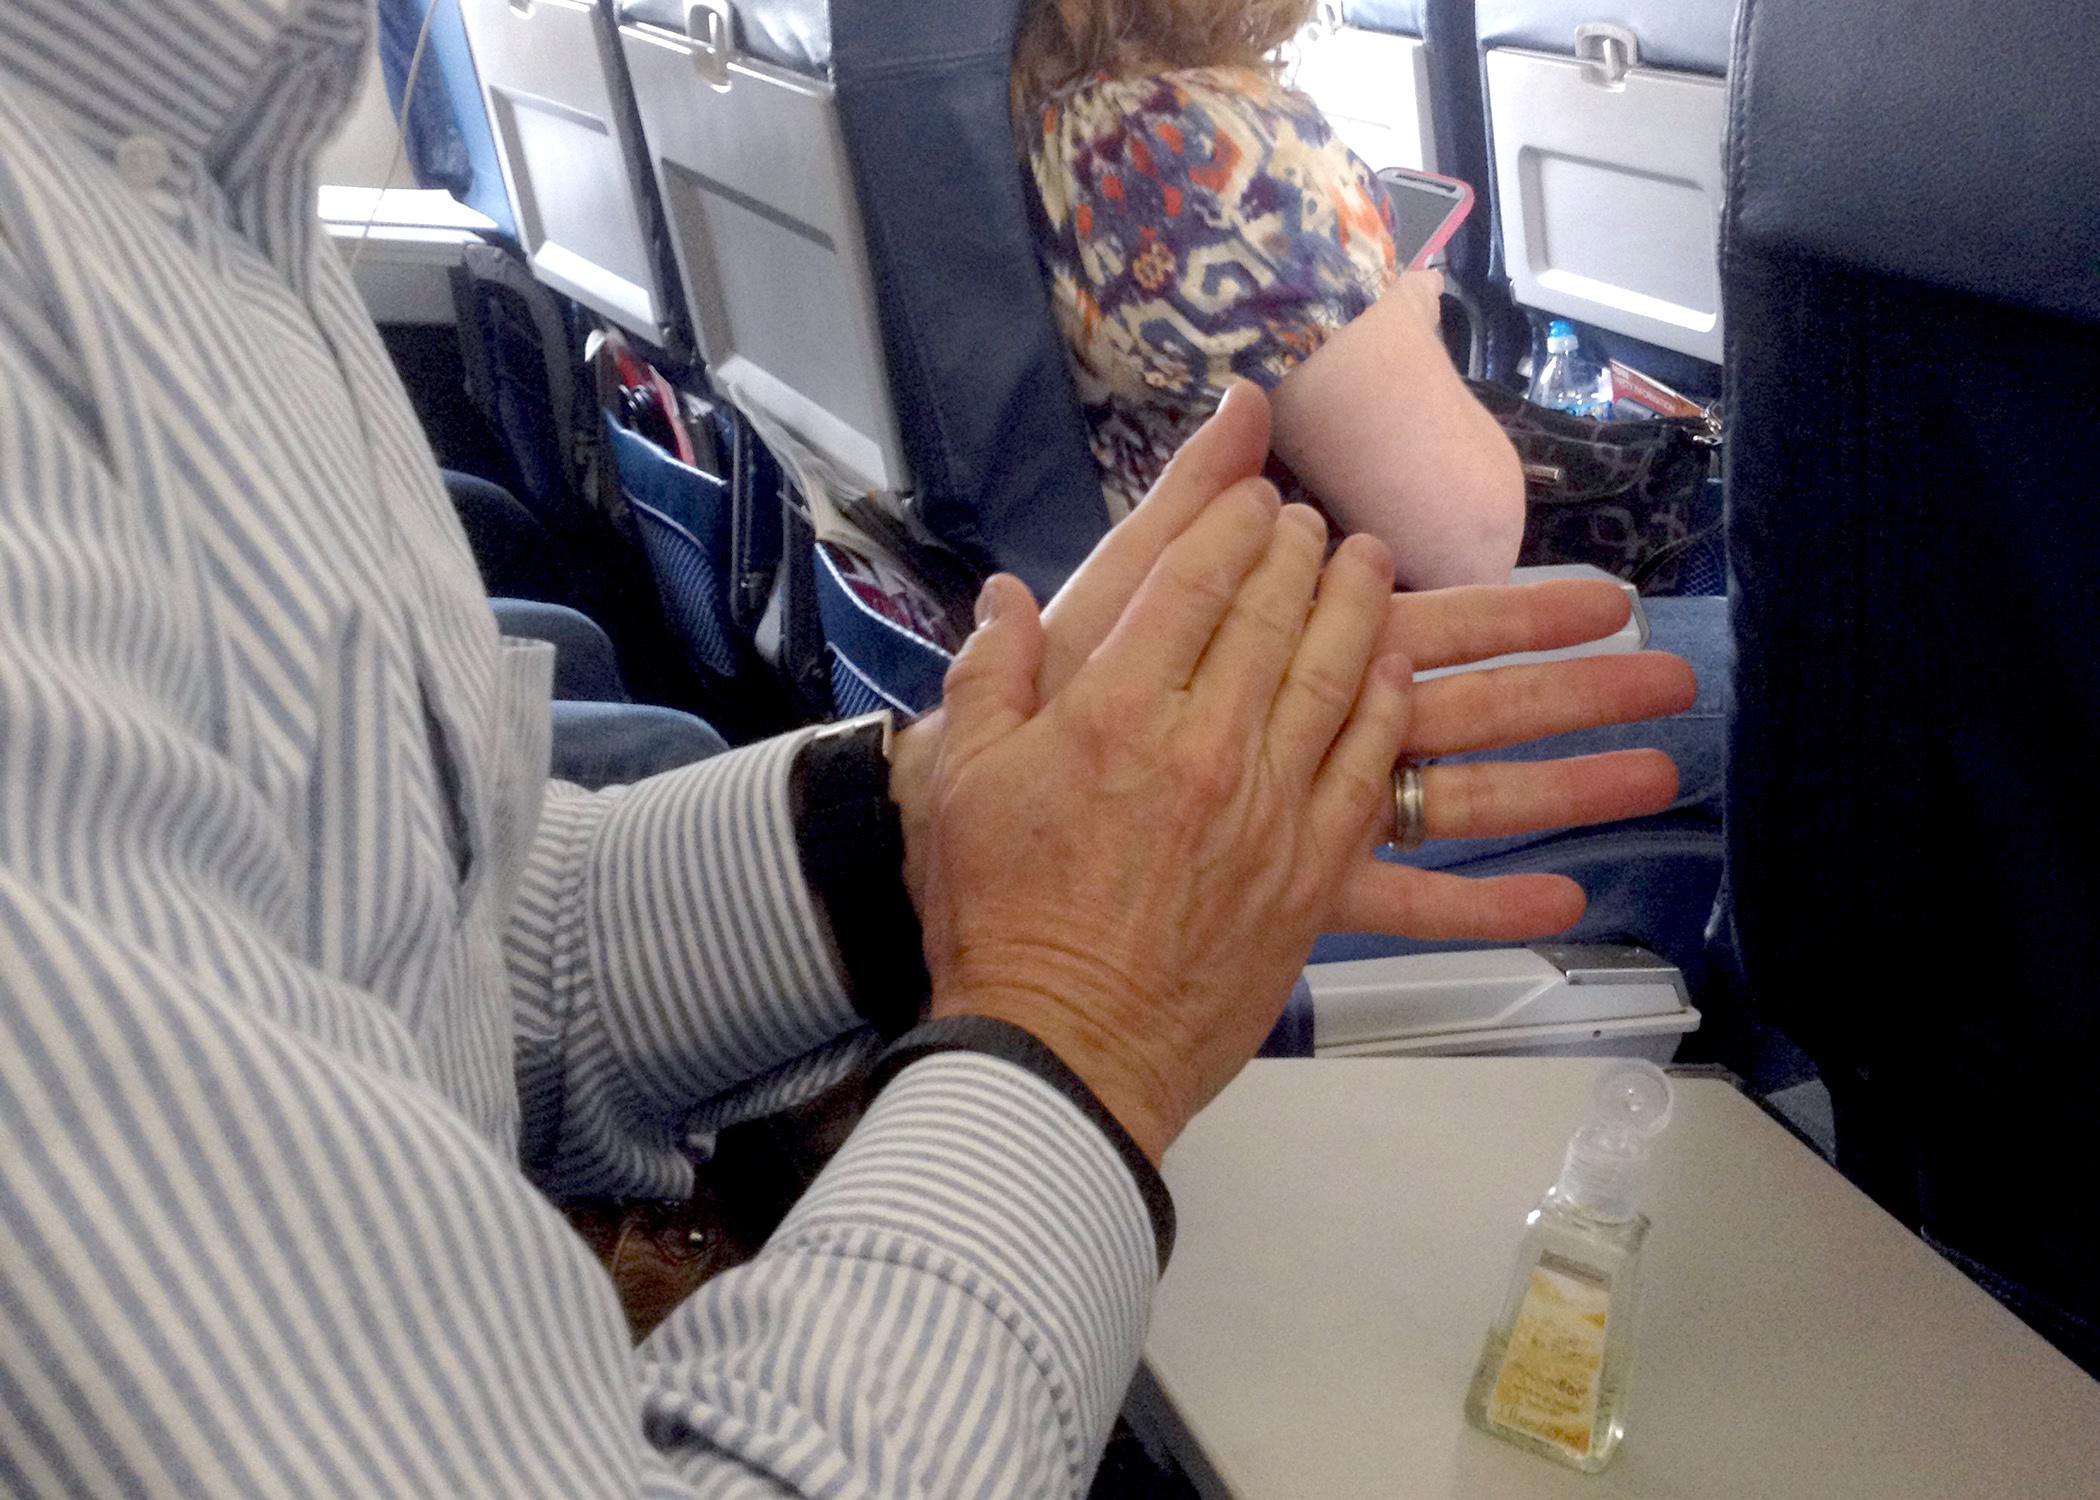 Frequent hand-washing is one of the best ways to prevent illness while travelling. While soap and water are best, an alcohol-based hand sanitizer is an on-the-go substitute. (Submitted Photo/Kathy Lawrence)